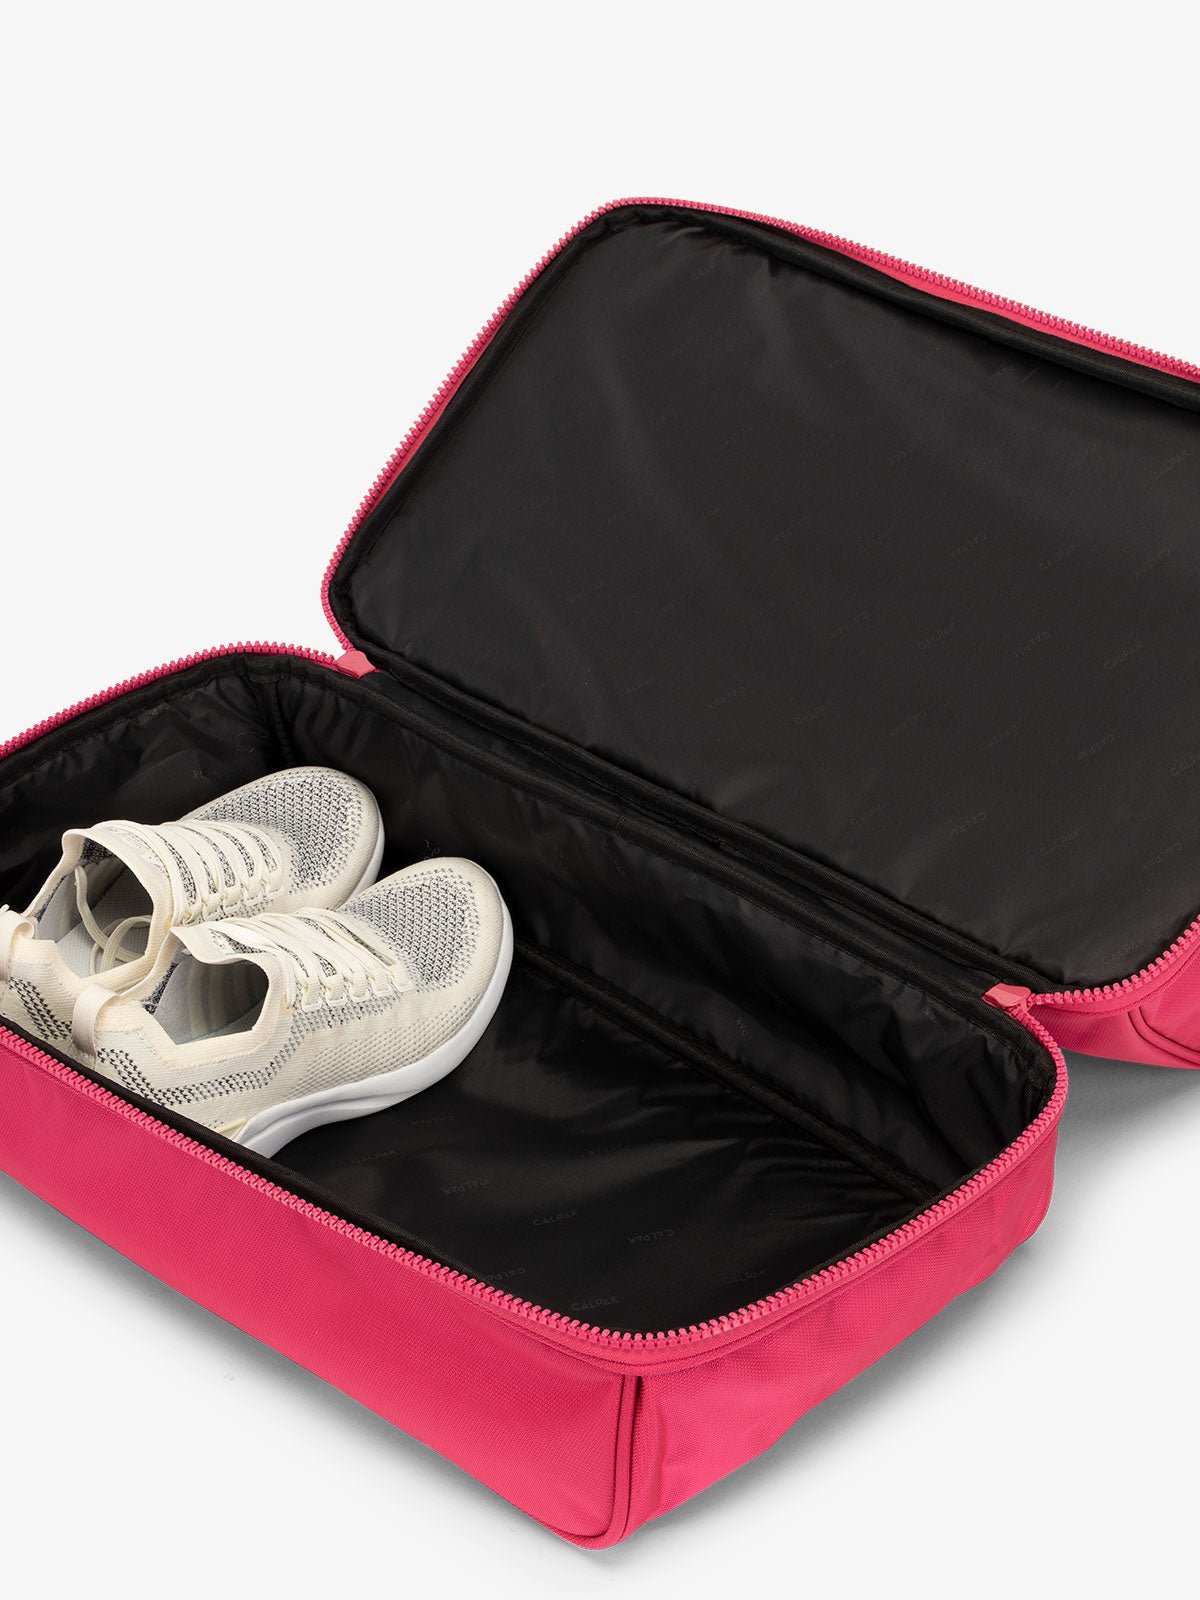 CALPAK Stevyn Duffel bag with bottom shoe compartment for travel in pink dragonfruit